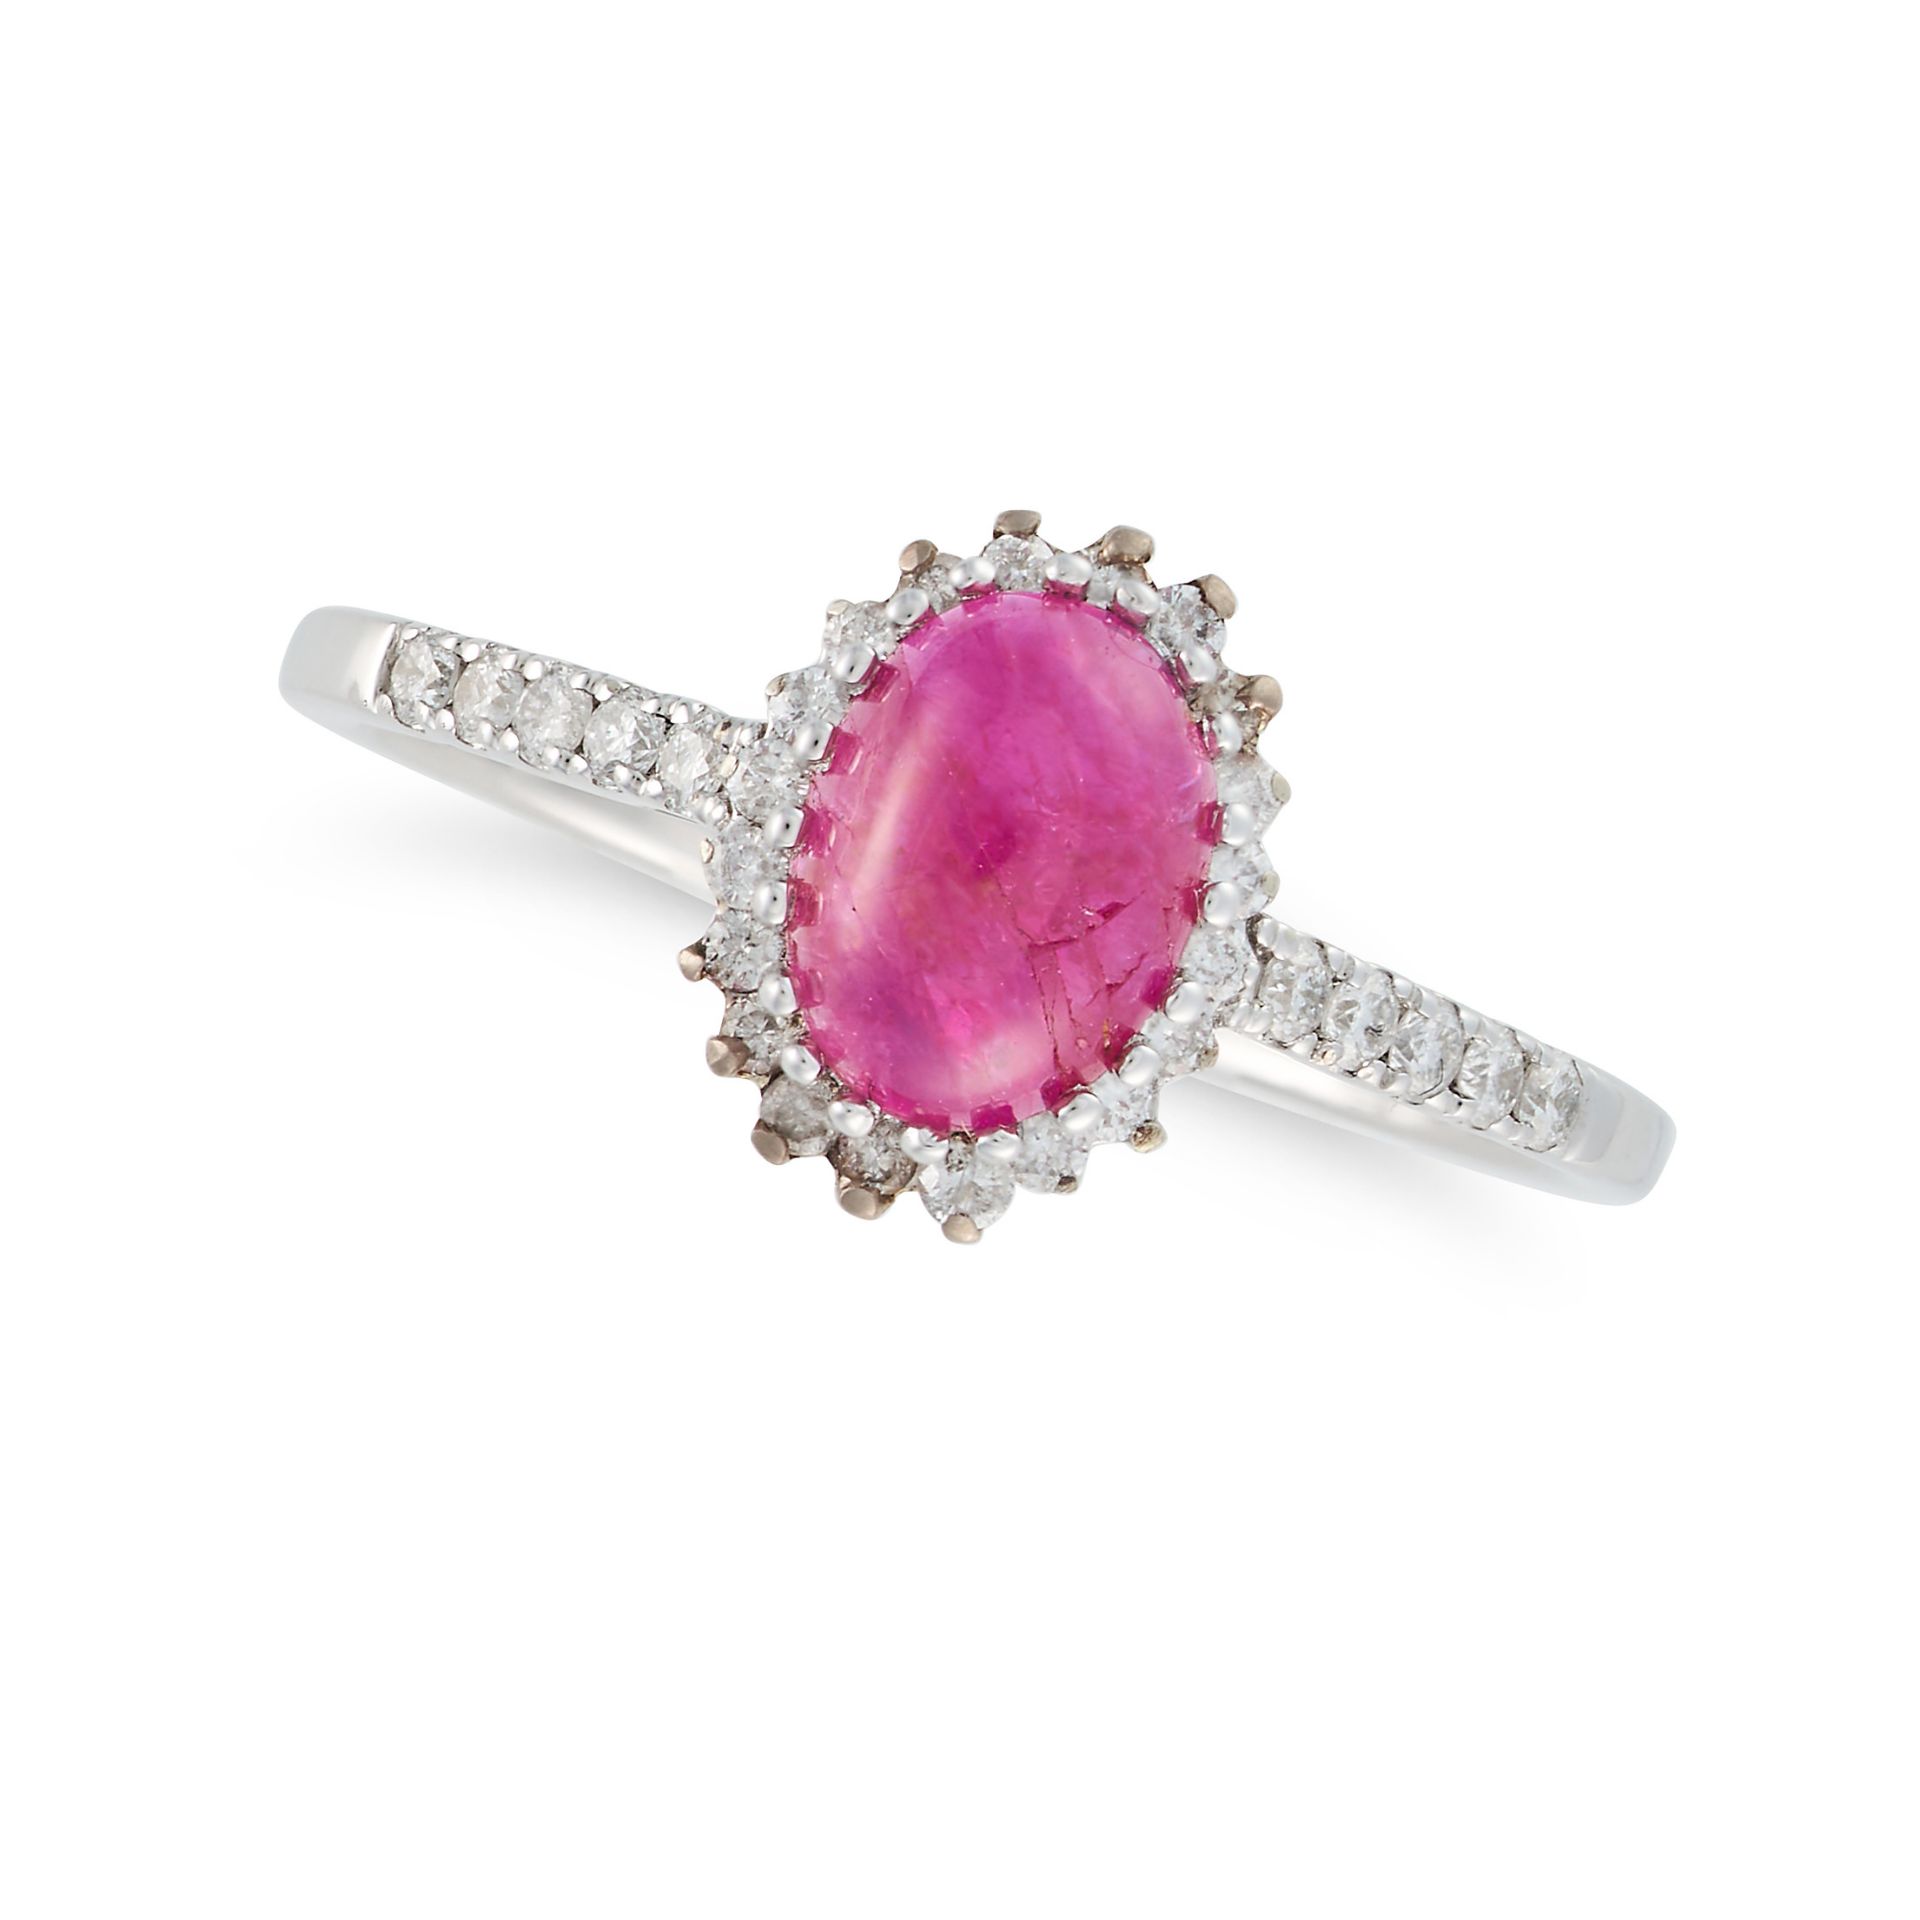 NO RESERVE - A RUBY AND DIAMOND RING in 9ct white gold, set with an oval cabochon ruby in a borde...